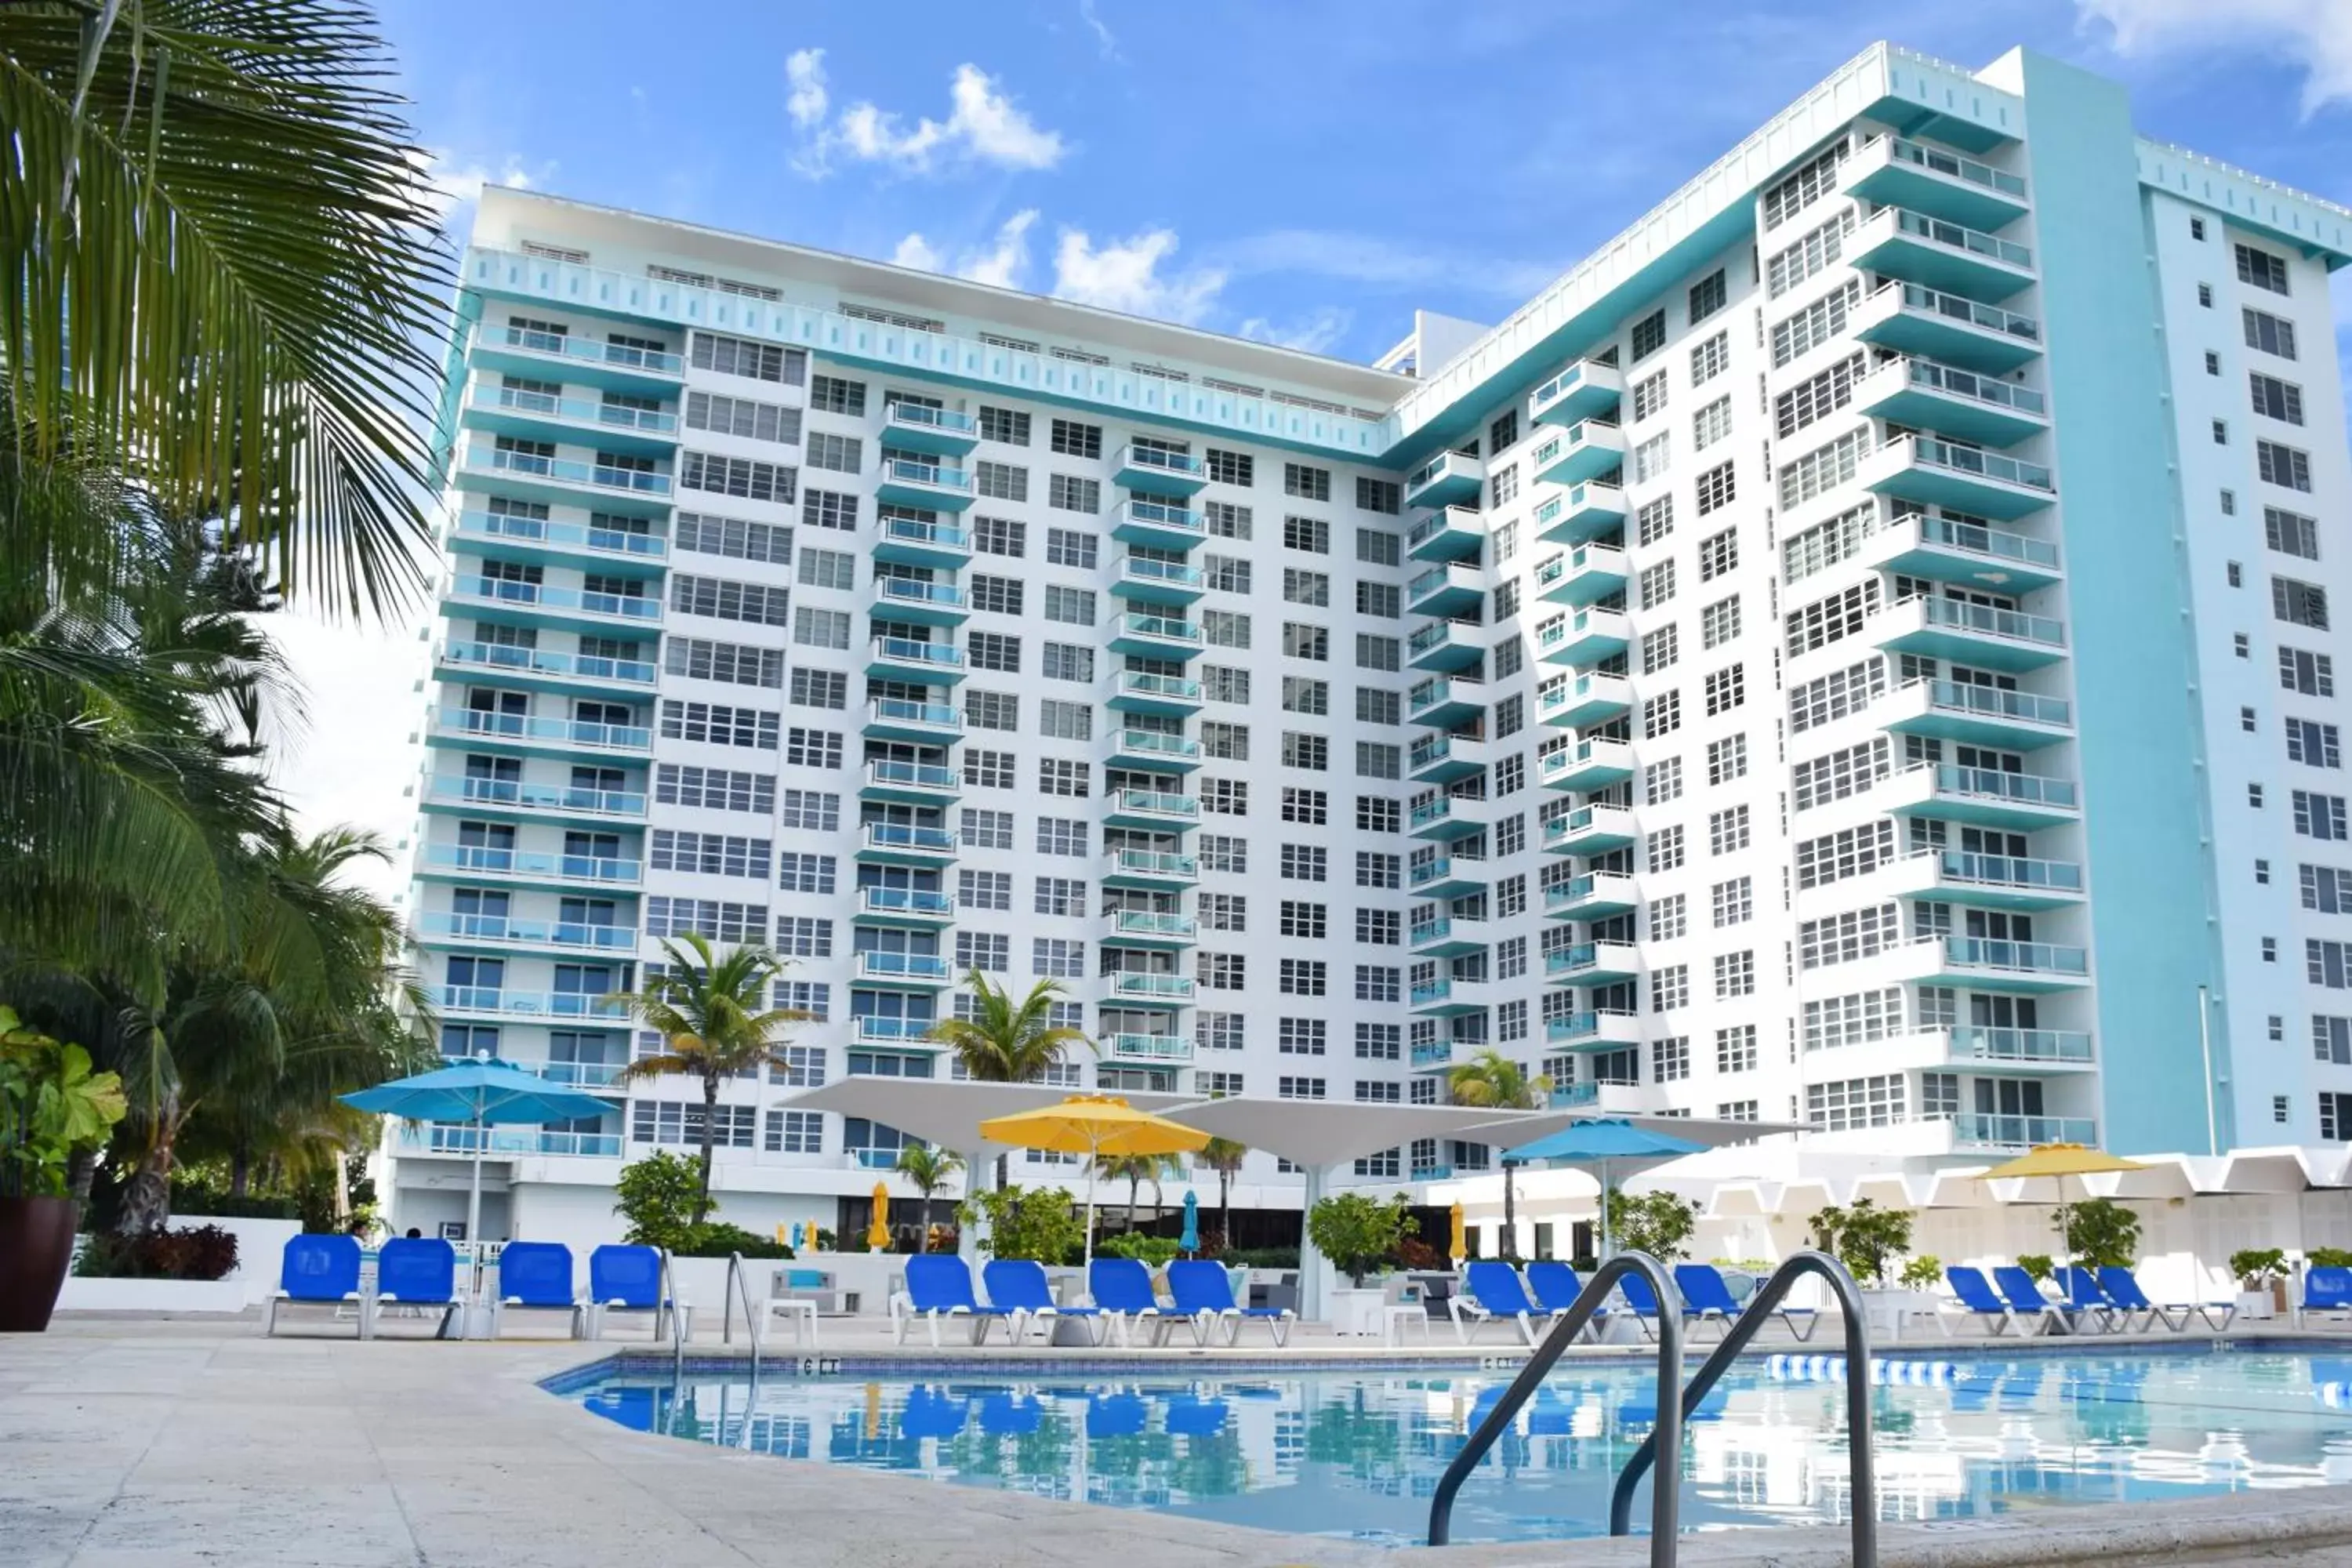 Property building, Swimming Pool in Seacoast Suites on Miami Beach